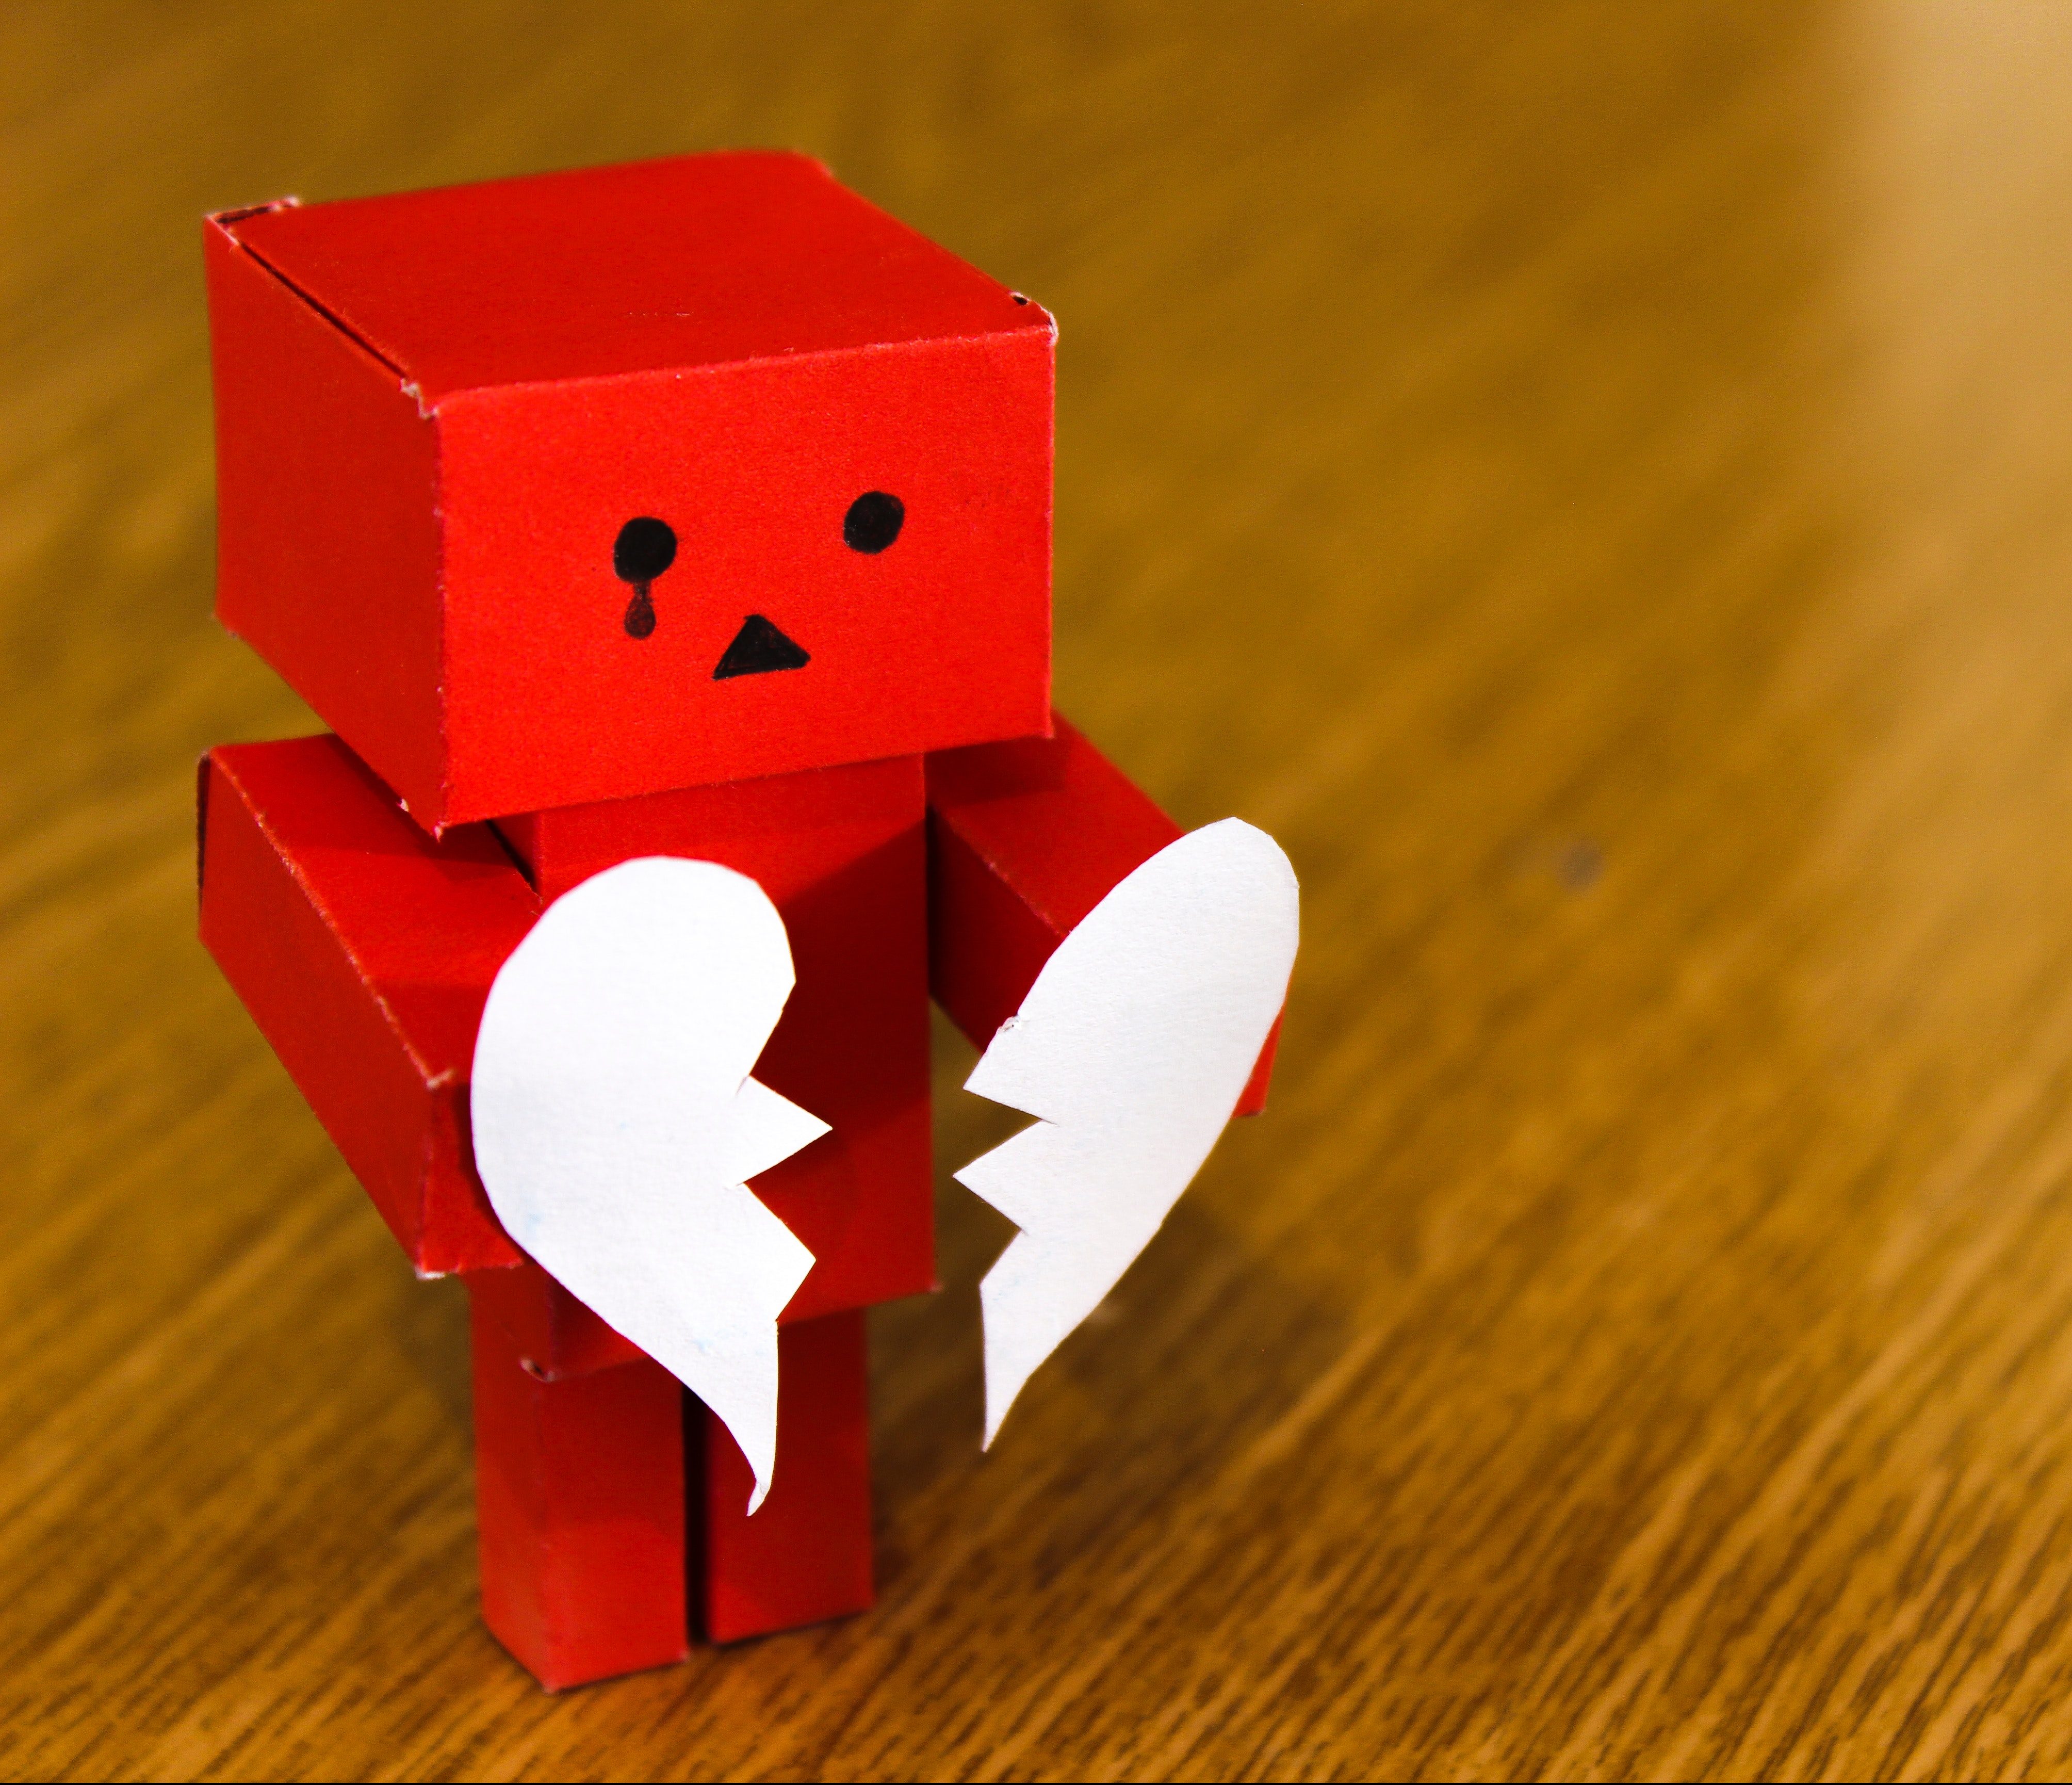 Photo of a red toy robot with a tear drawn onto its face holding two halves of a broken heart in its hands.